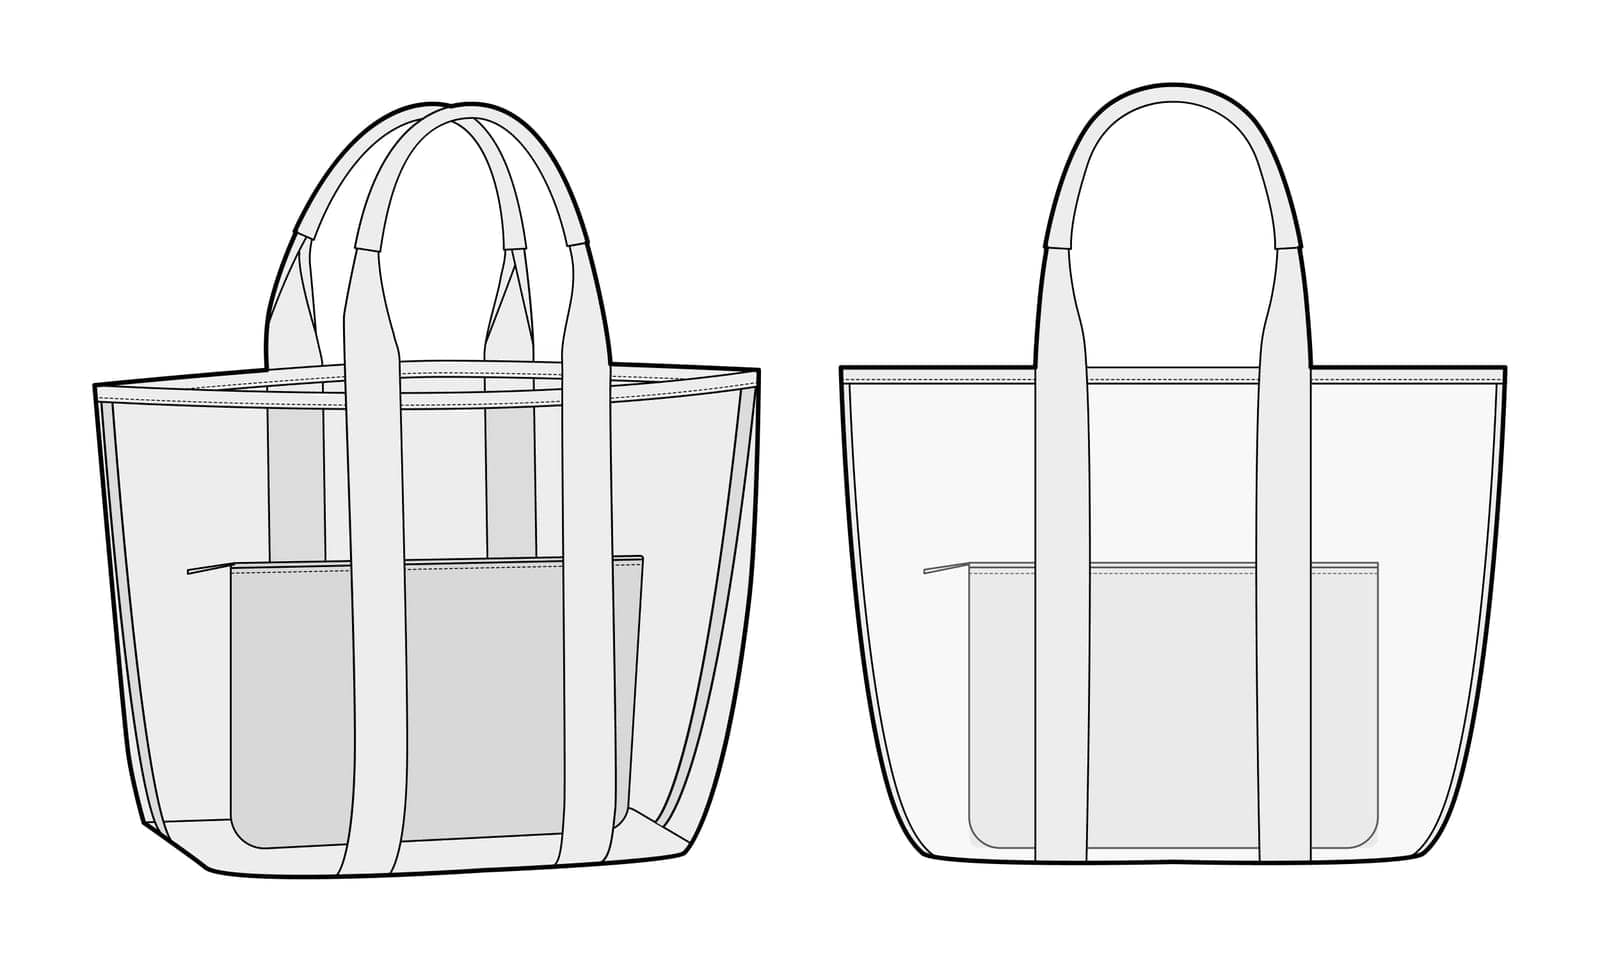 Beach Transparent Pool Tote with inner removable pouch bag. Fashion accessory technical illustration. Vector satchel front 3-4 view for Men women style, flat handbag CAD mockup sketch outline isolated